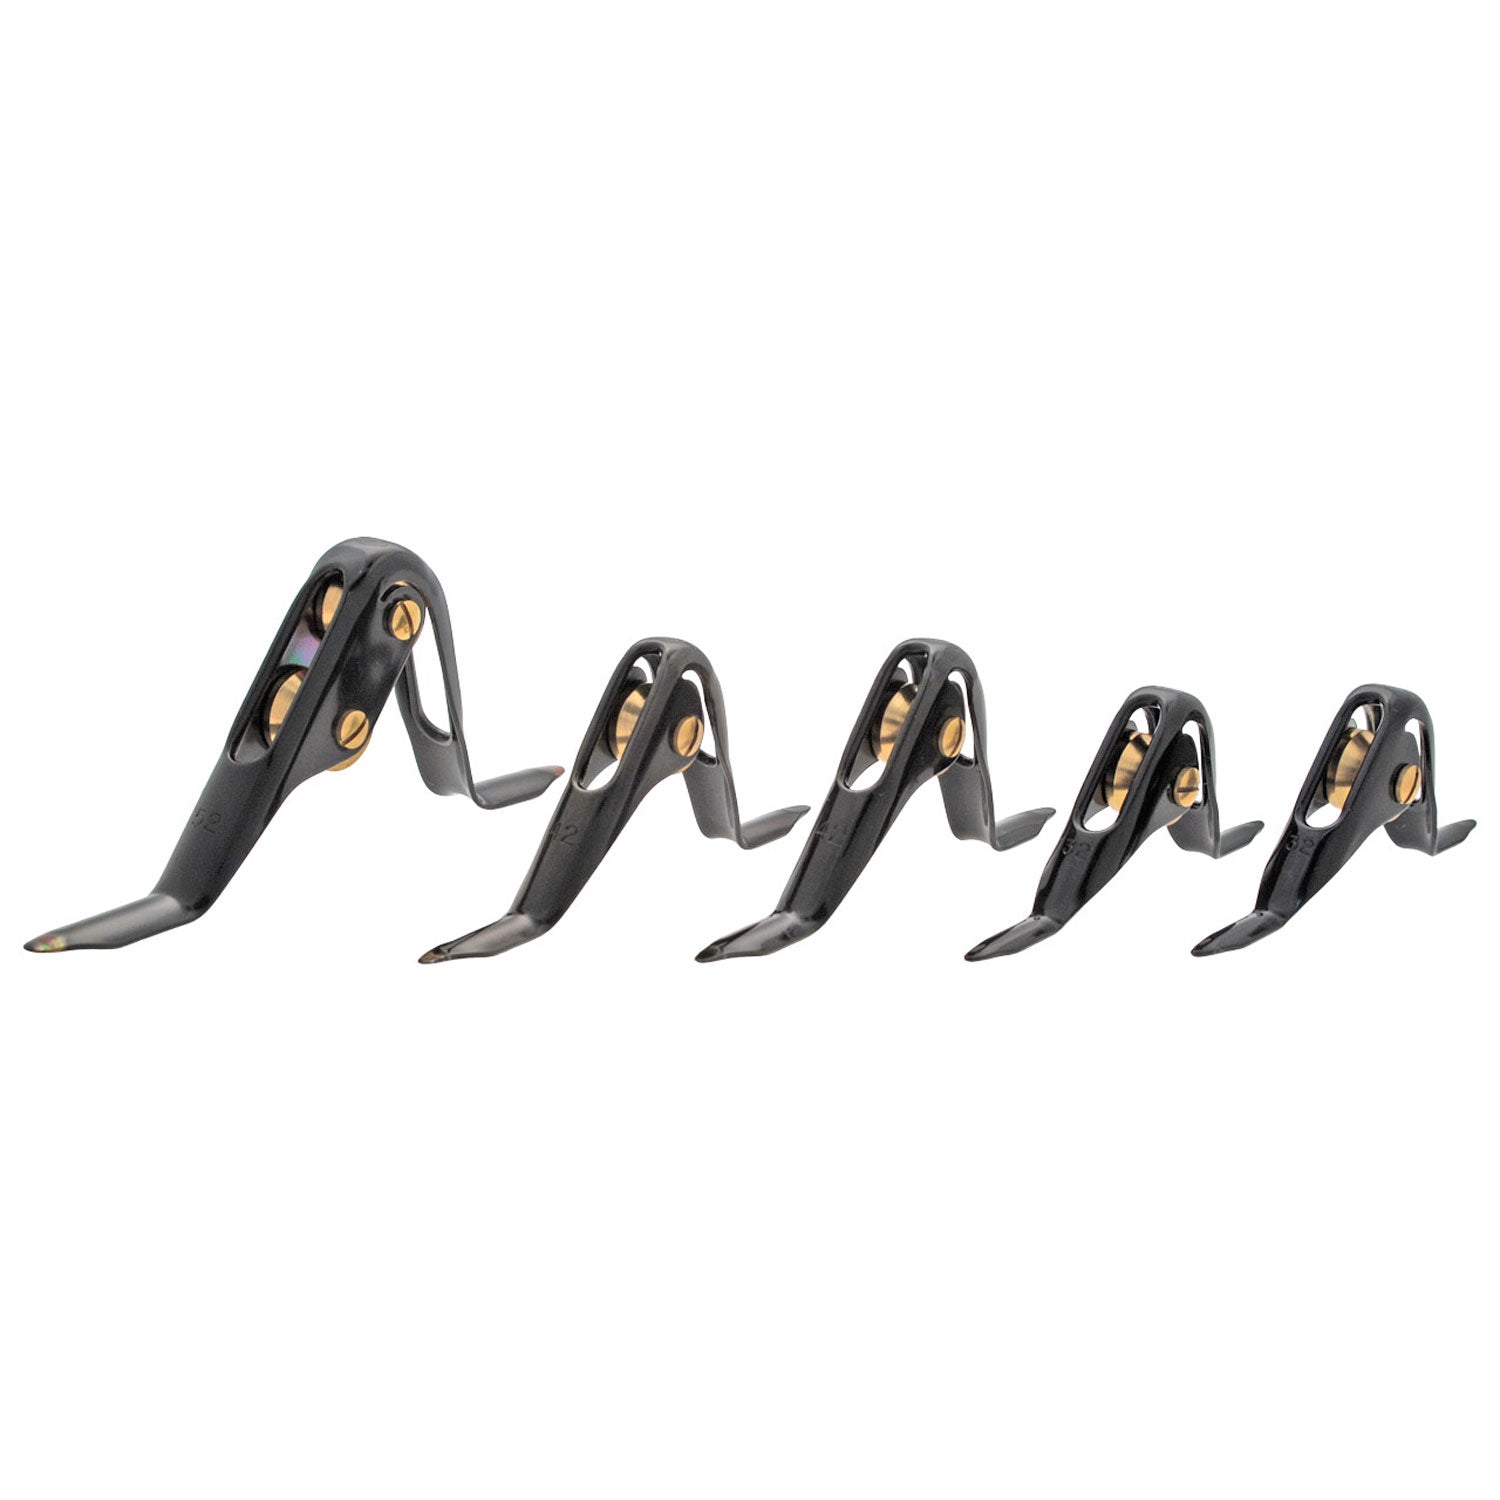 AFTCO Big Foot® Super Heavy Duty Roller Guide Complete Sets